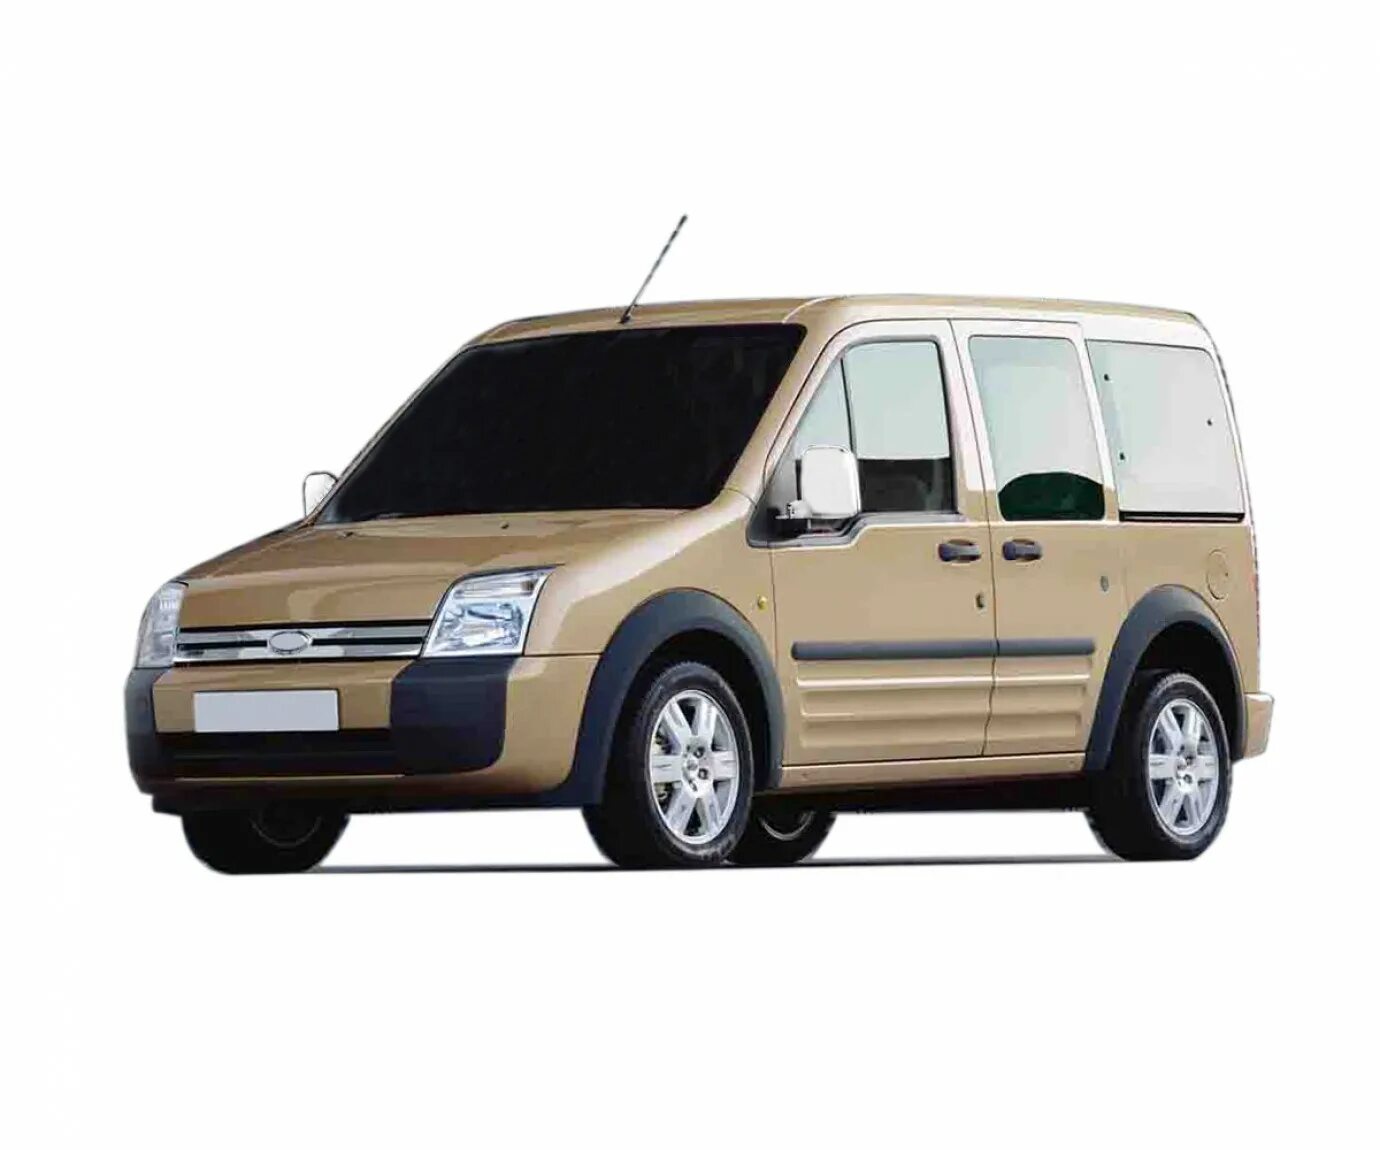 Форд торнео коннект замена. Ford Tourneo connect 2002. Ford Transit connect 2002. Ford Tourneo connect 2007. Ford Tourneo connect 2005.